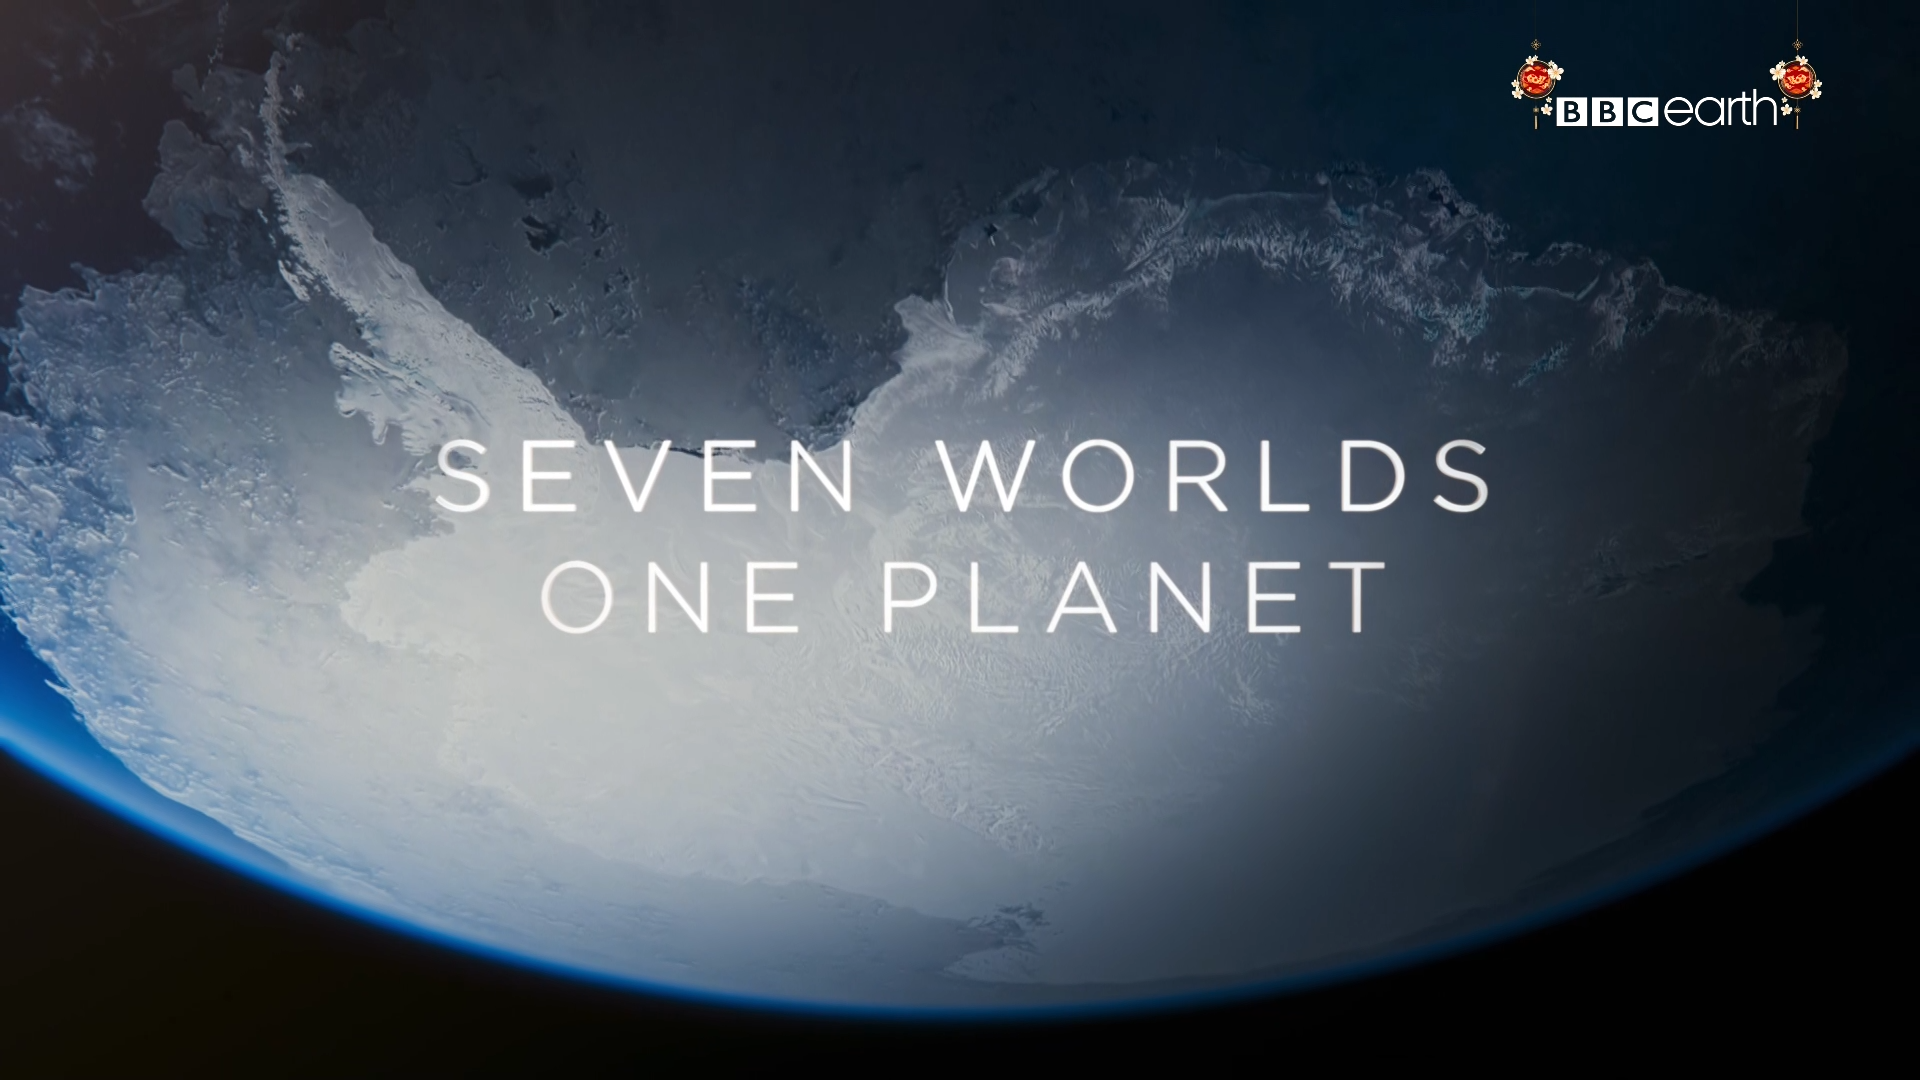 One Planet. Seven Worlds one Planet. Planet first